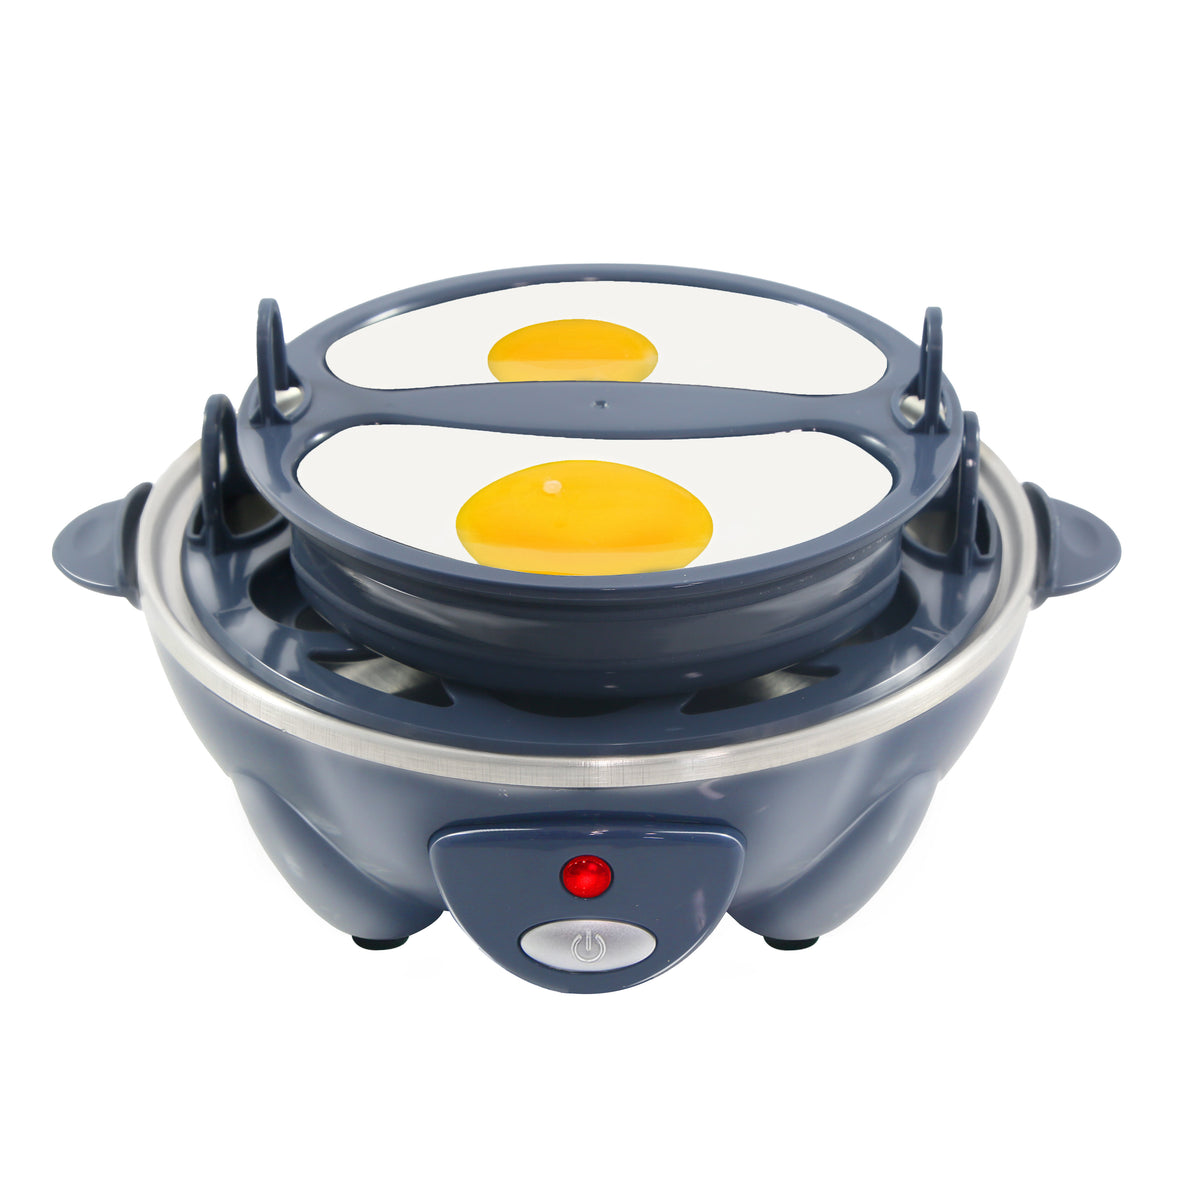  Elite Gourmet EGC1405M 2-Tiered Rapid Egg Cooker, 5-Egg Poacher,  Omelets, Soft, Medium, Hard-Boiled Eggs with Auto Shut-Off and Buzzer, BPA  Free, 14 eggs, Mint: Home & Kitchen